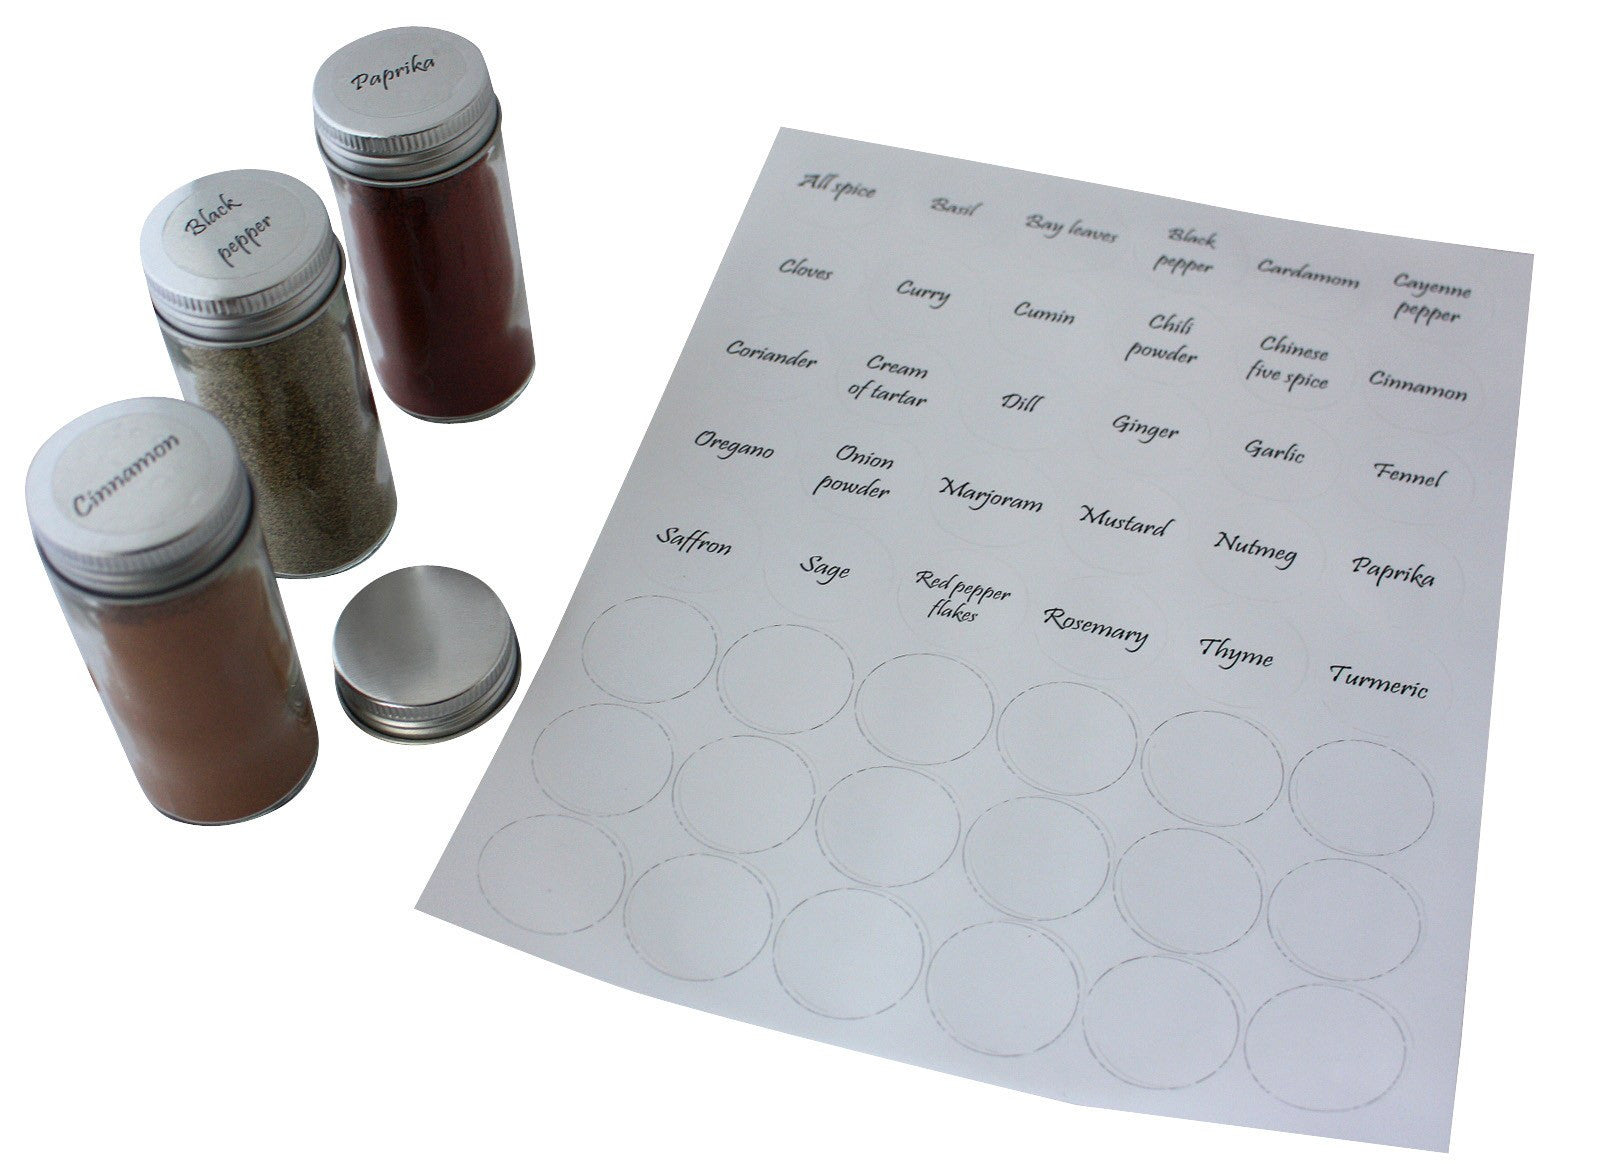 Royal Green - 2 Sets of Pre-Printed Spices Stickers for Jar Container and Lids Plus Blank Labels for DIY - 92 Pack